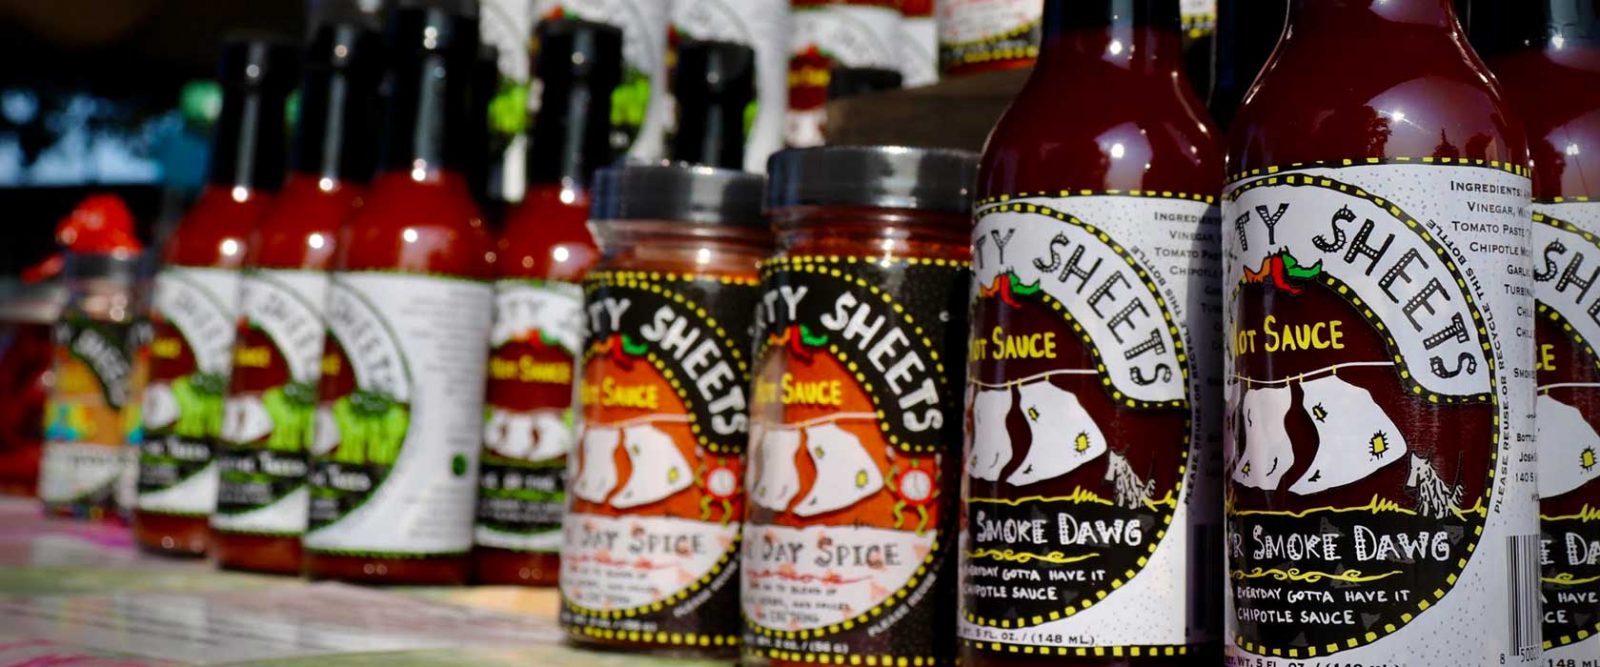 Display of a variety of hot sauces made by Ol' Dirty Sheets